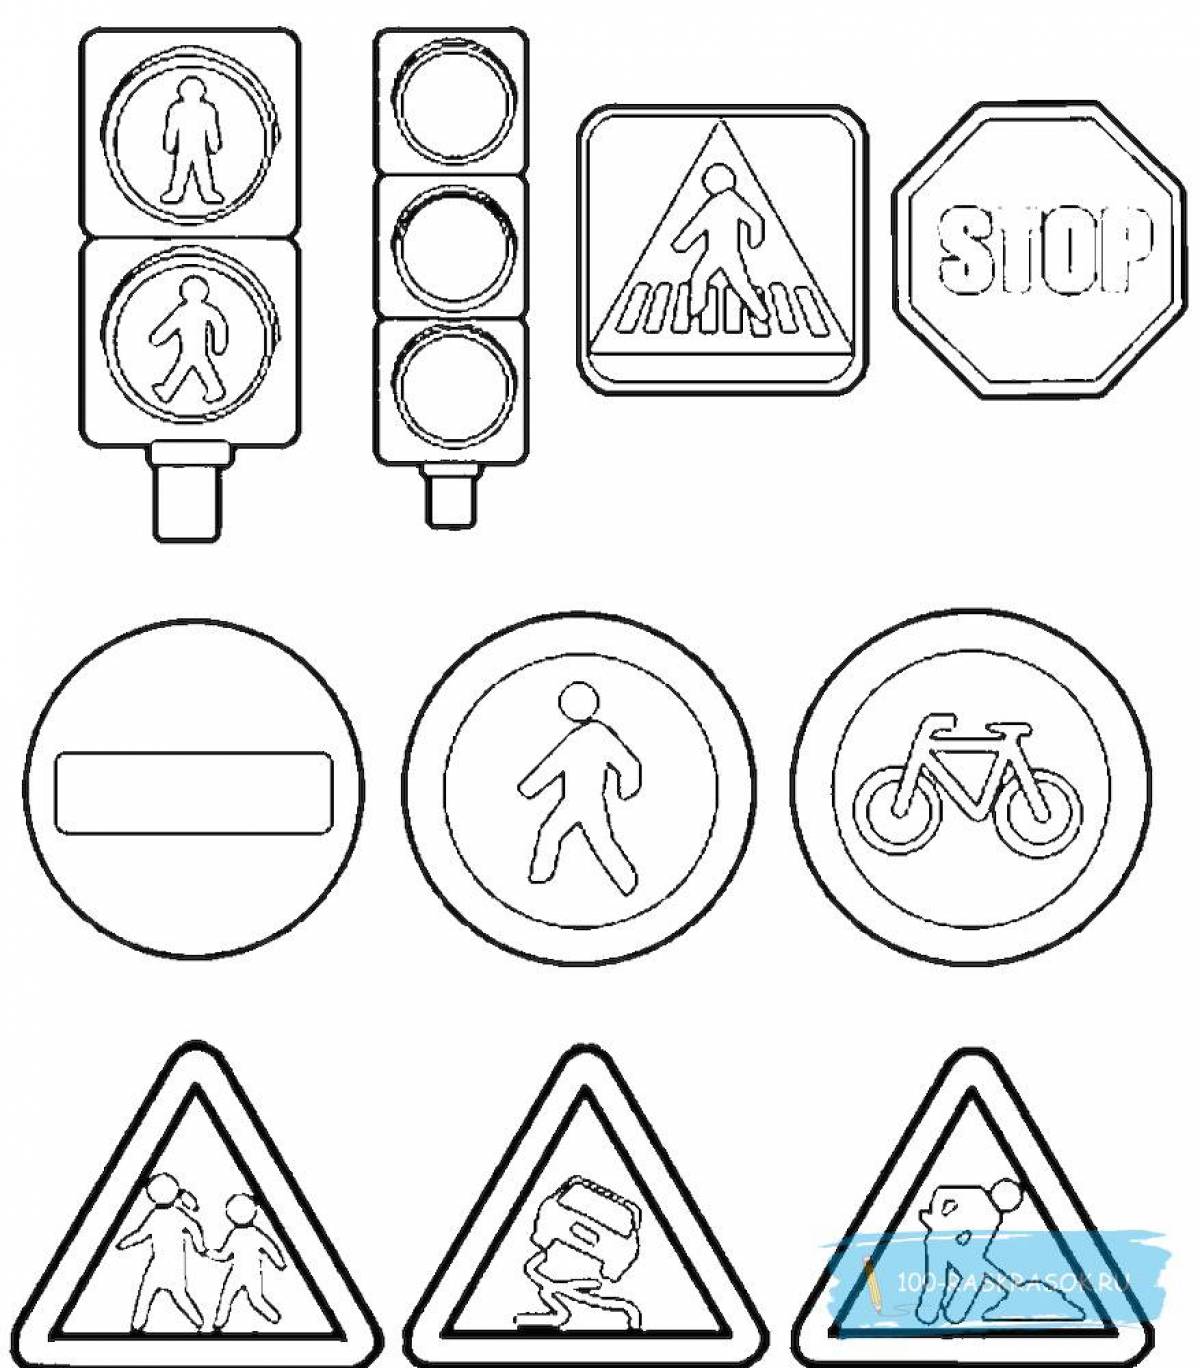 Traffic signs for kids #23